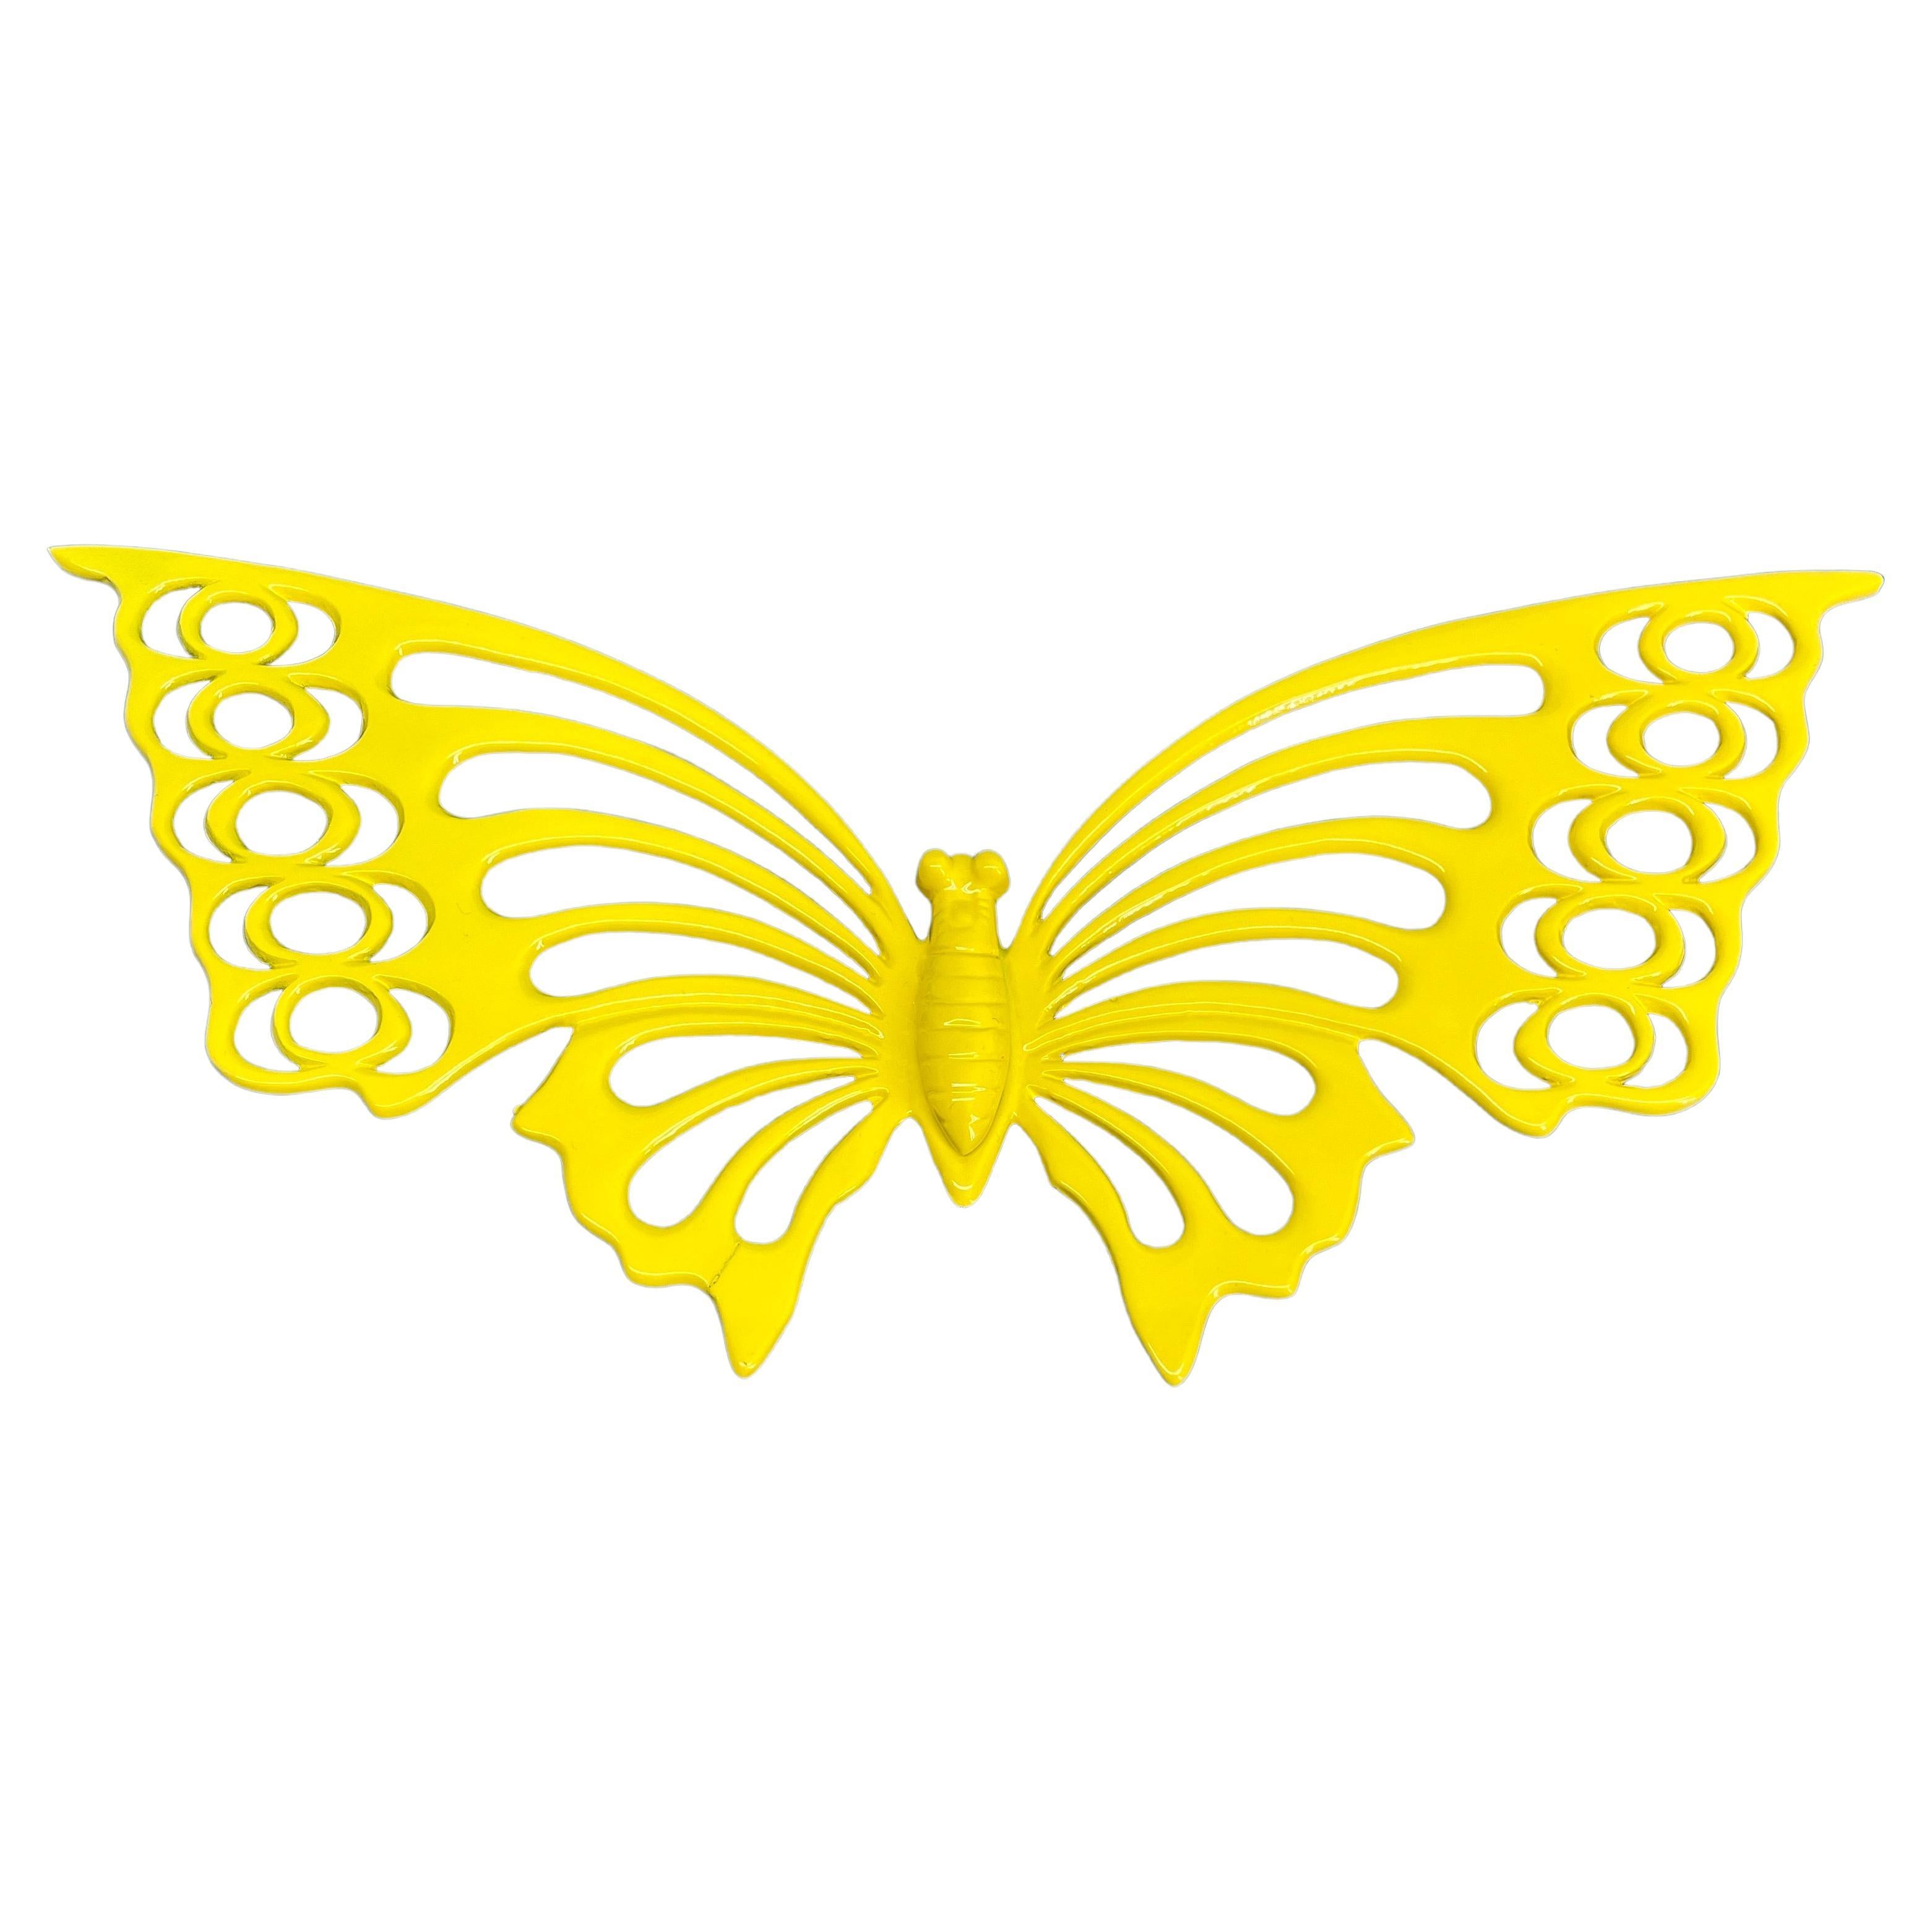 Large Brass Midcentury Butterfly Sculpture in Bright Yellow Powder-Coat For Sale